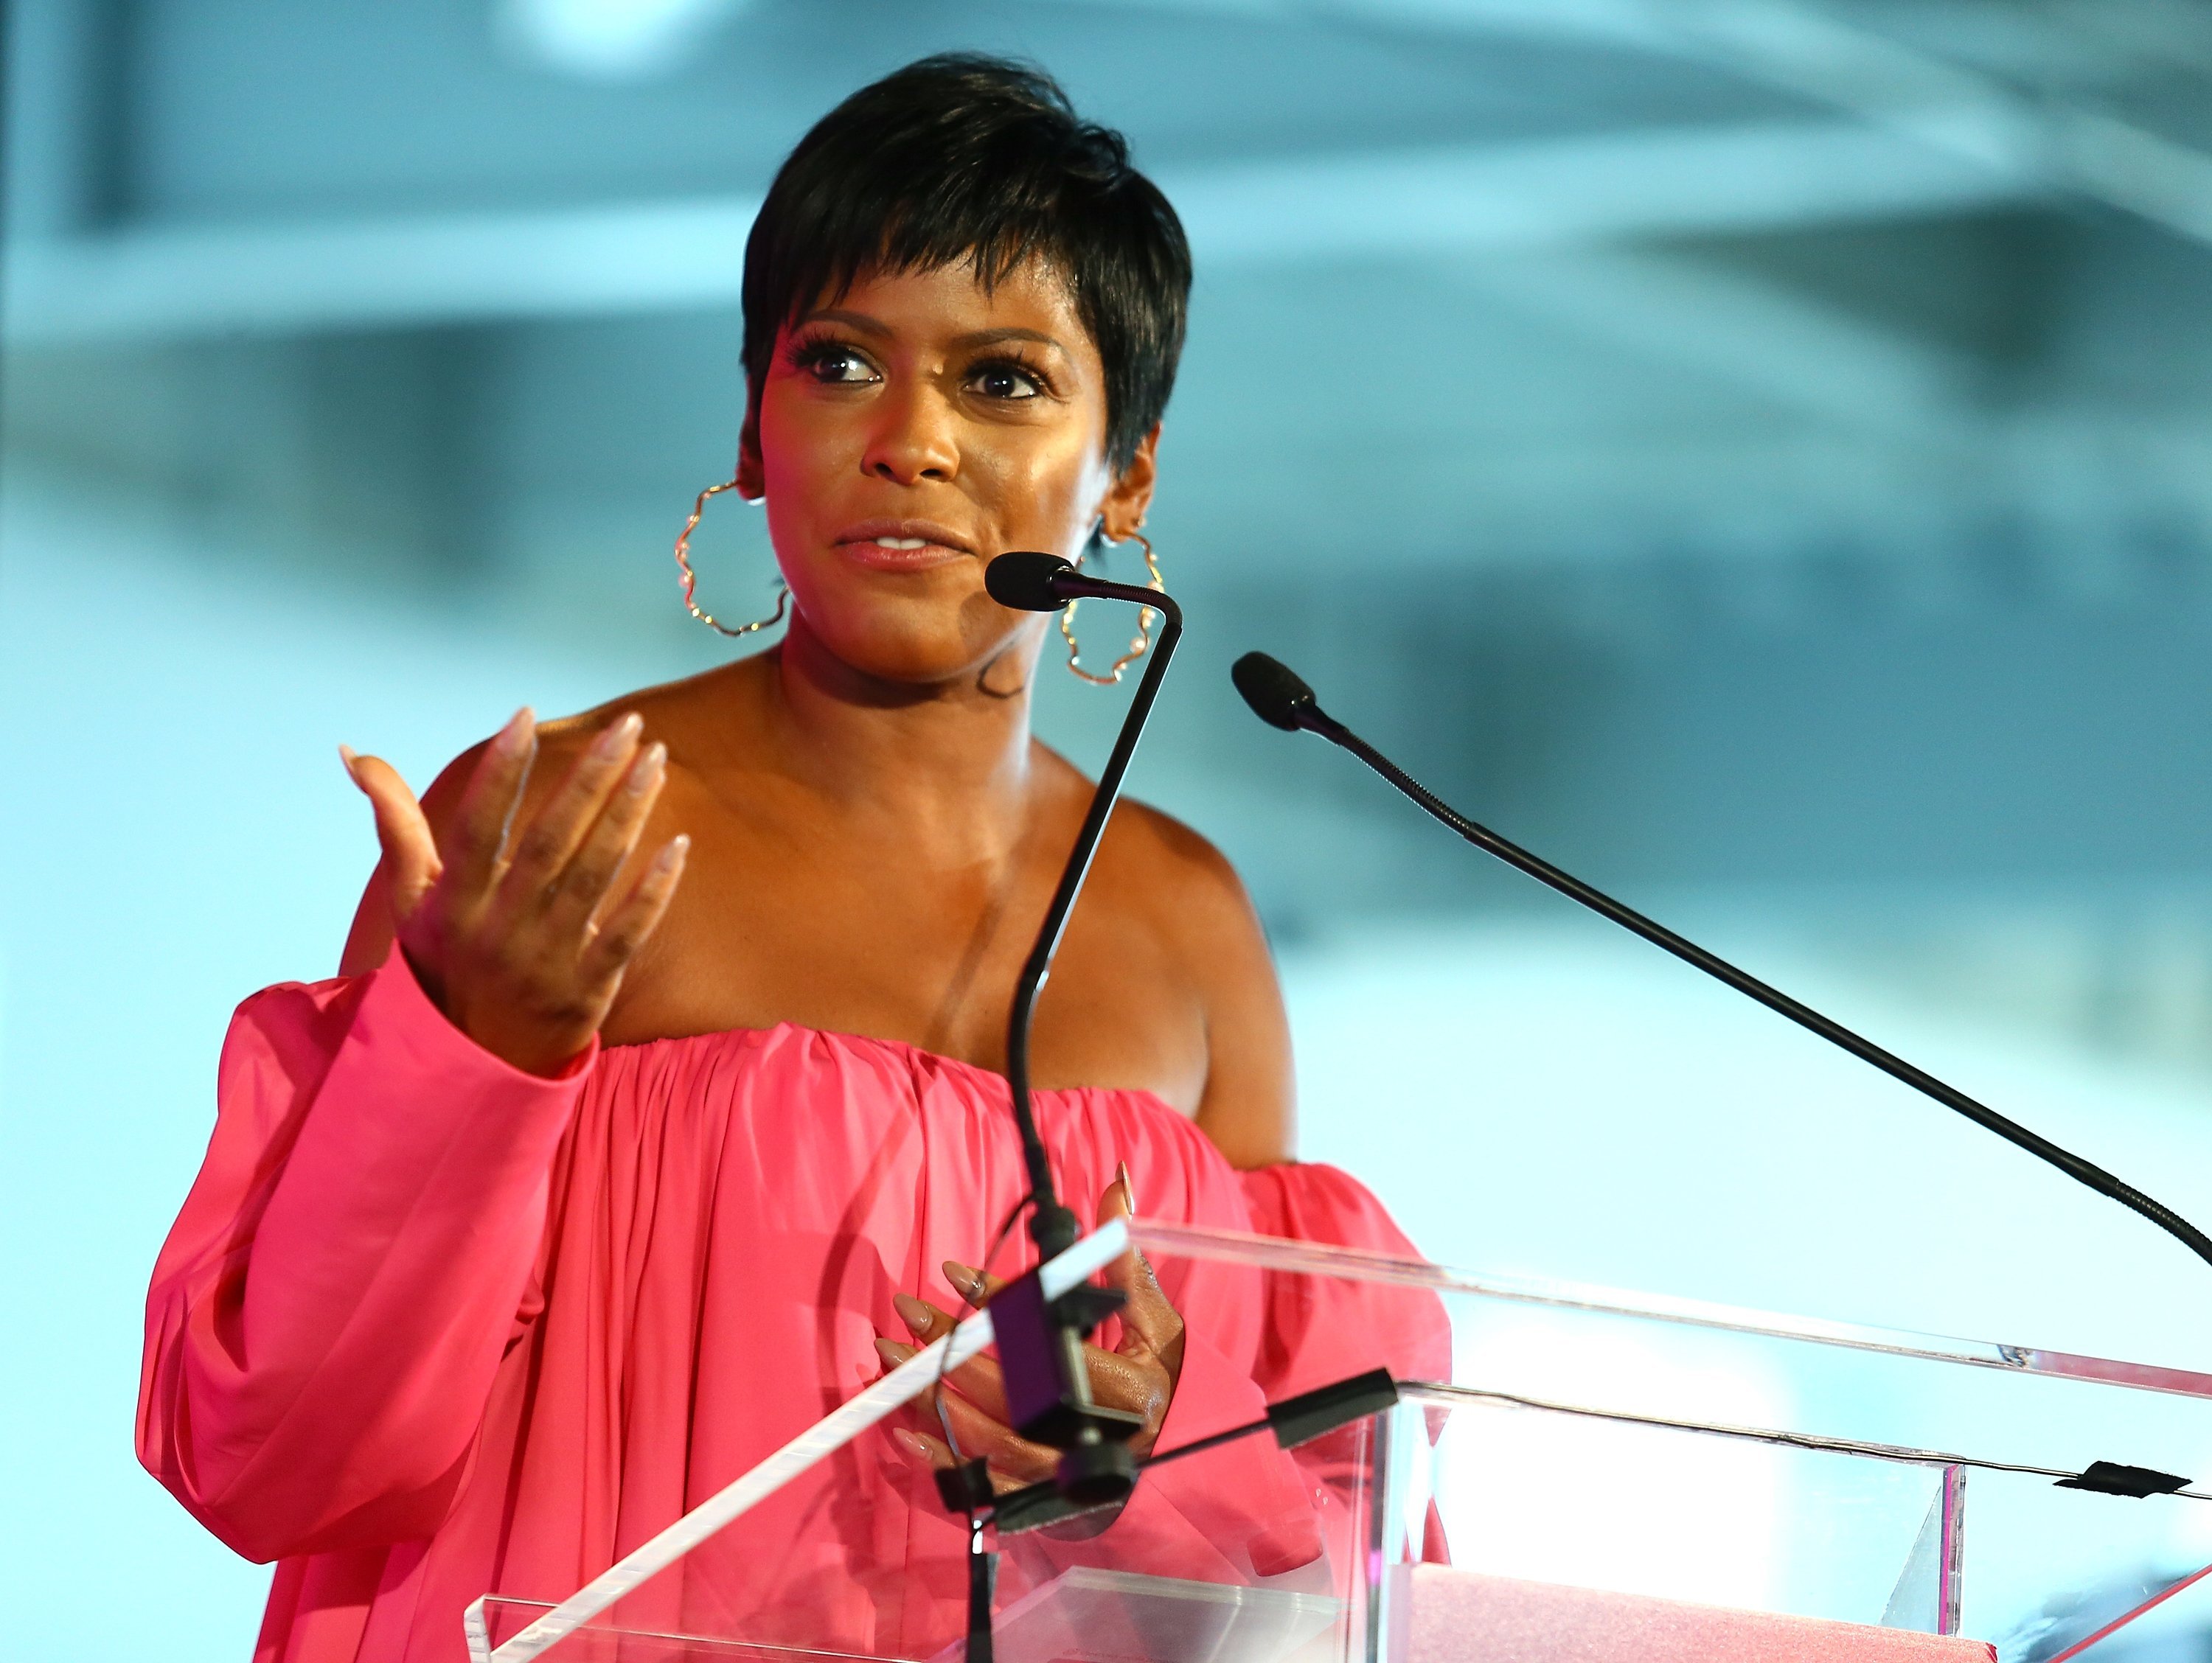 Tamron Hall at a speaking engagement in August 2018. | Photo: Getty Images